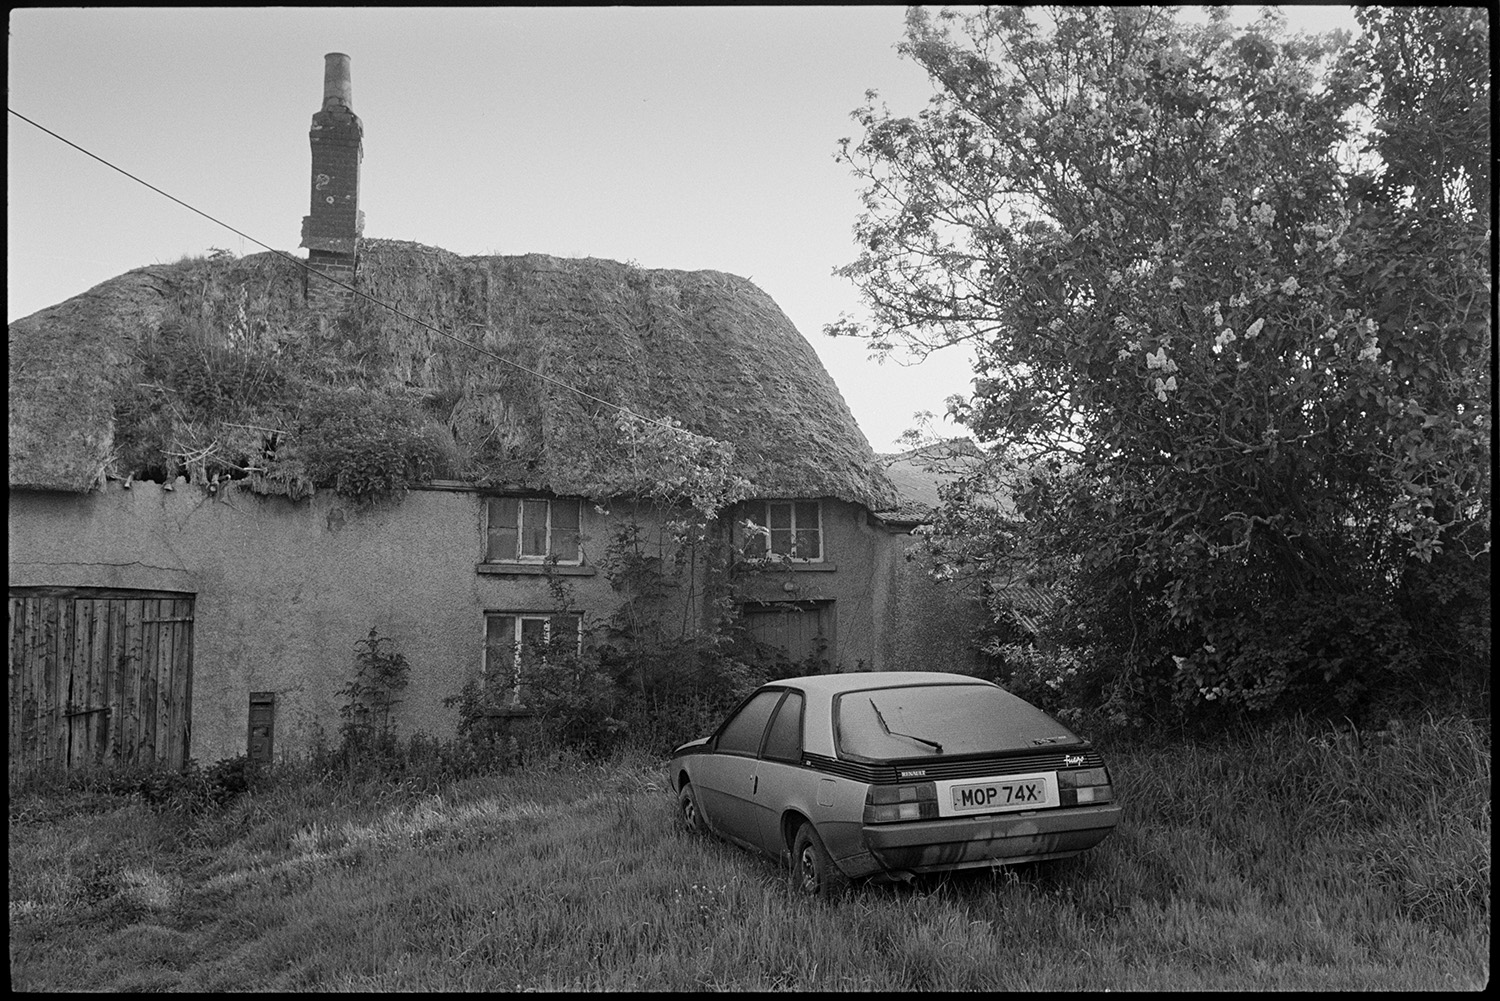 Derelict cob and thatch farm with letterbox in wall.
[An overgrown and derelict cob farmhouse with a thatched roof at Mary Week, Chulmleigh with a  Renault Fuego saloon car parked on the grass in front of the house. A wooden garage door and post box can be seen in the wall of the house.]